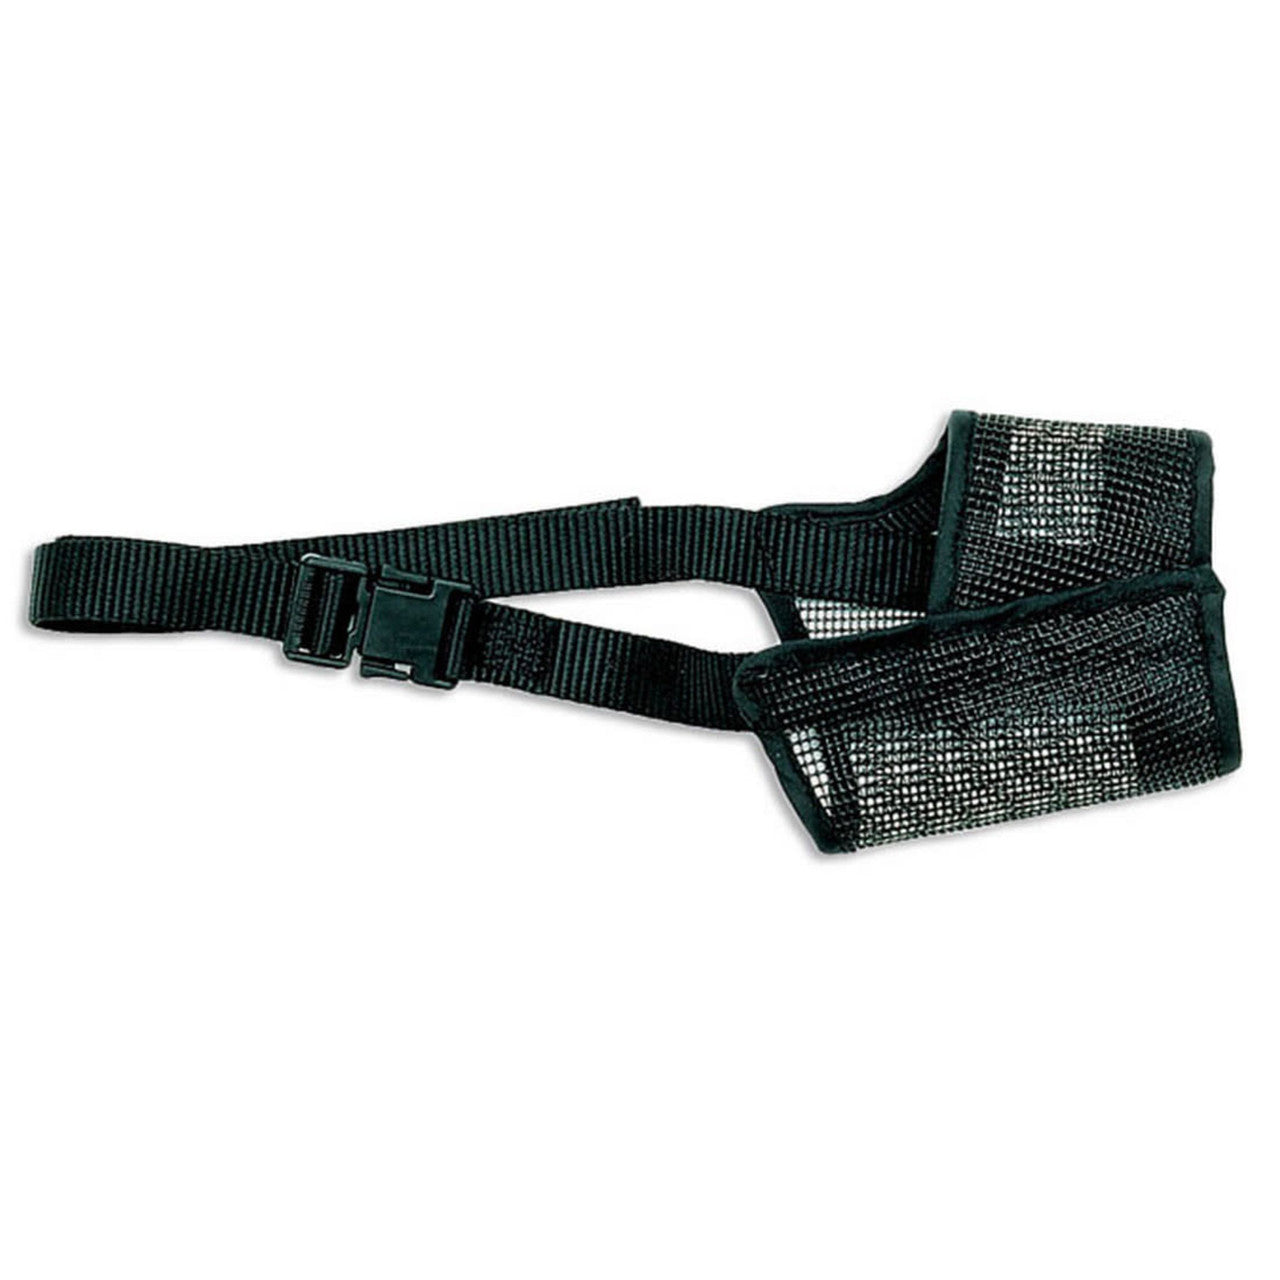 Best Fit Adjustable Mesh Dog Muzzle 5 in